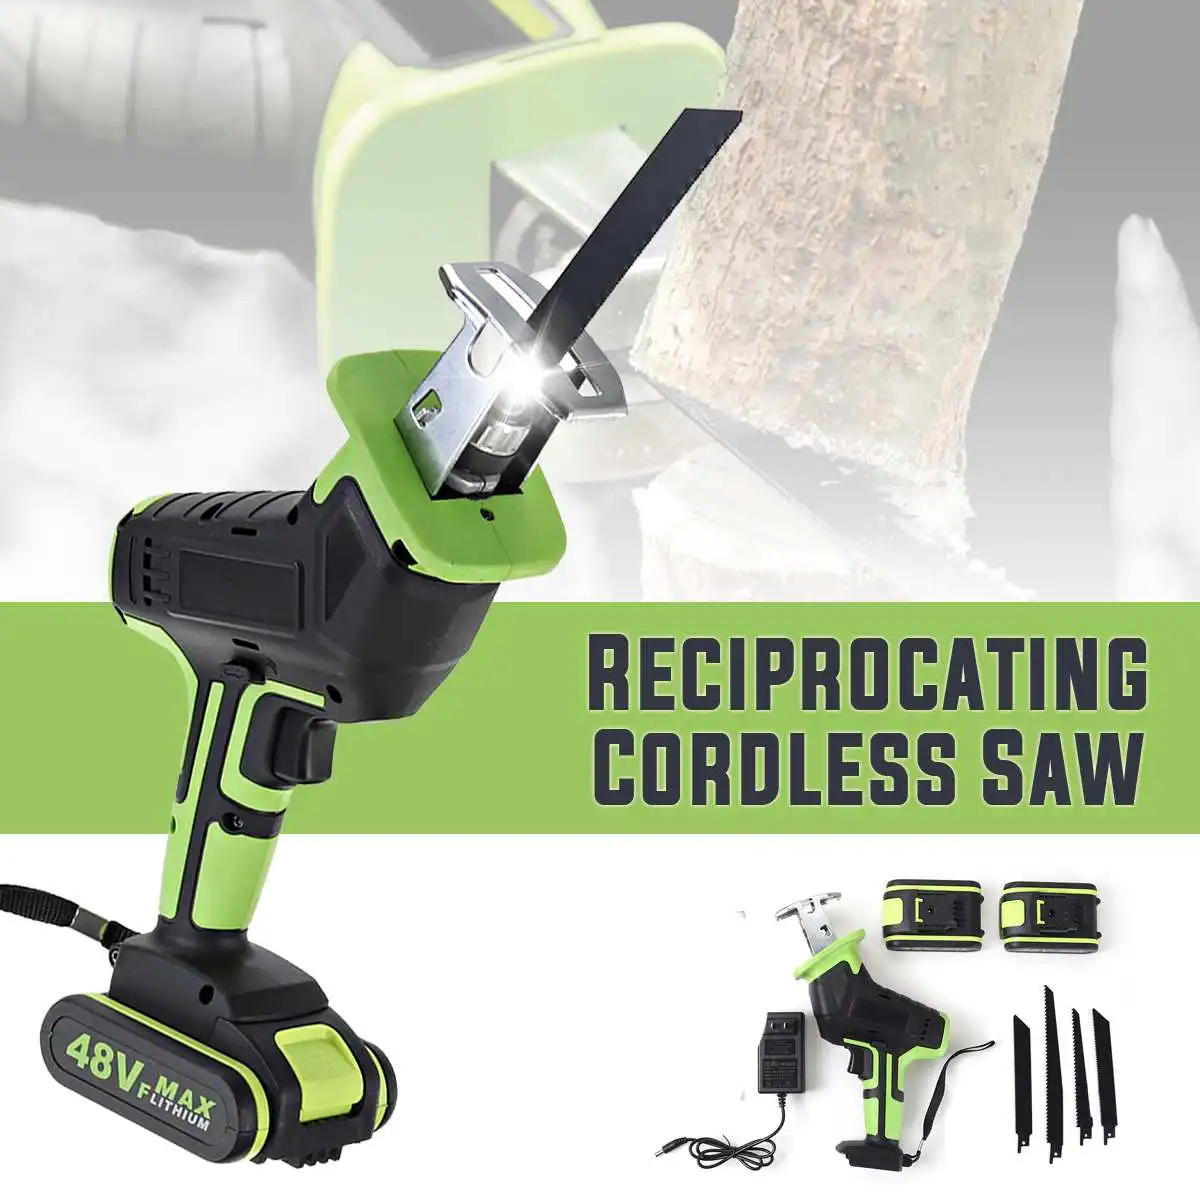 Drillpro 48V Cordless Reciprocating Saw +4 Saw blades Metal Cutting Wood Tool Portable Woodworking Cutters With 1/2 Battery New